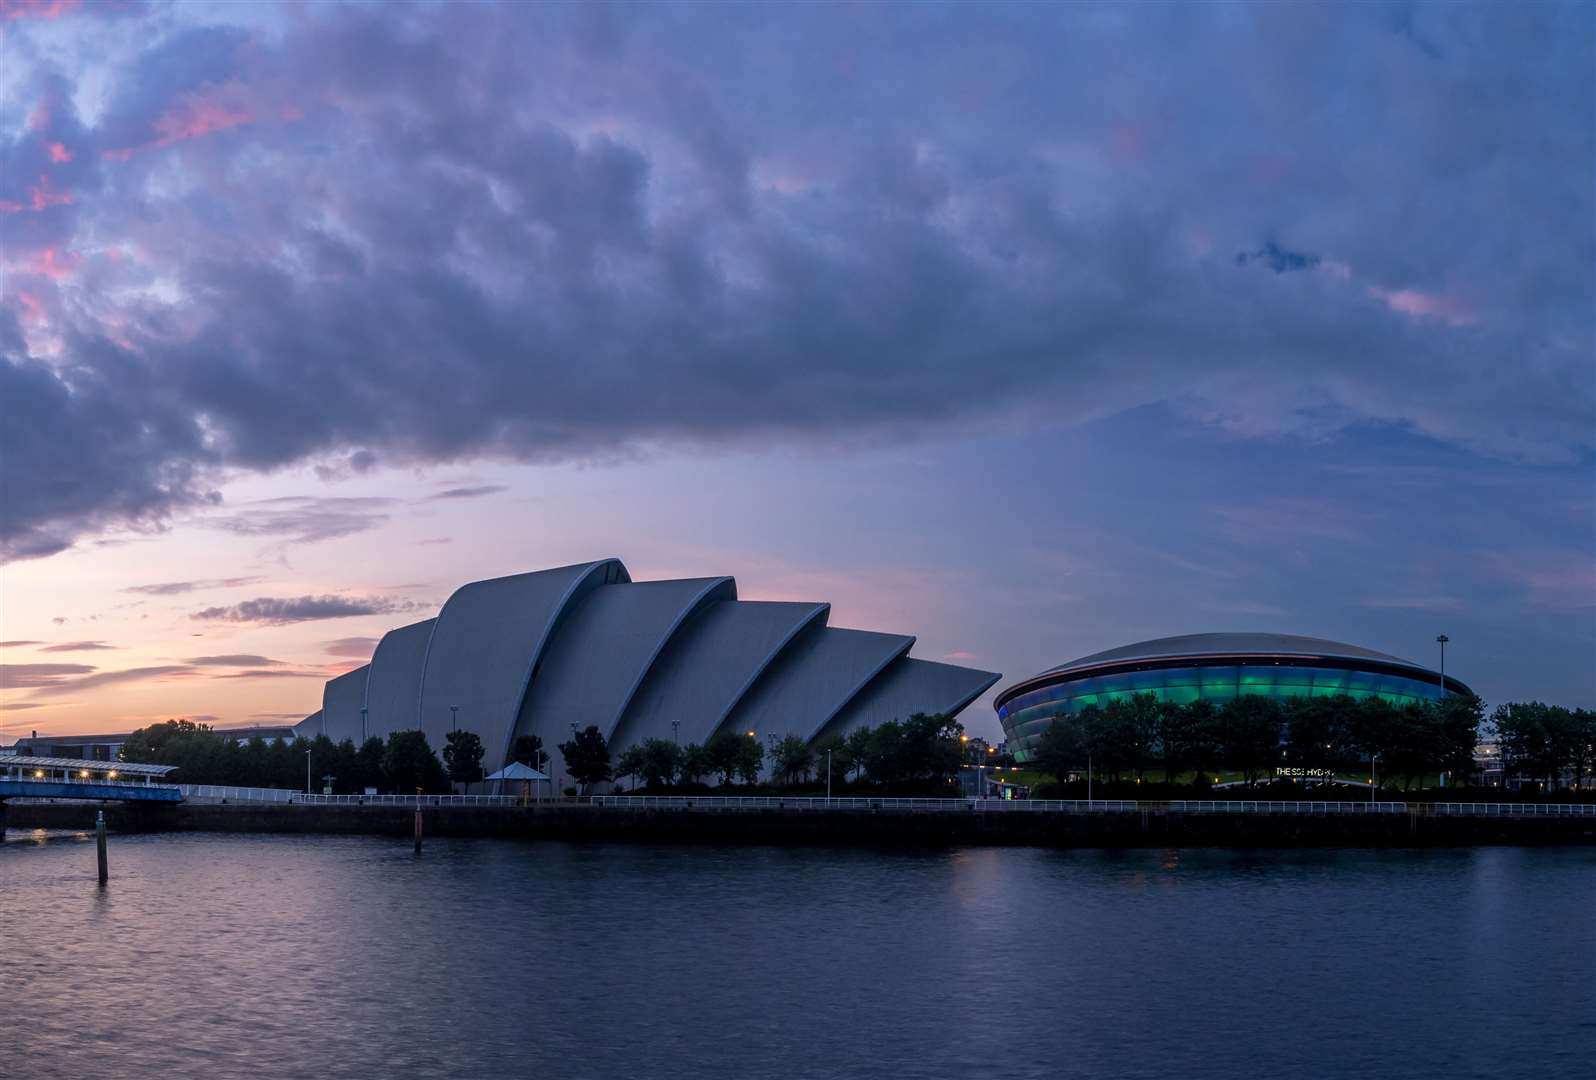 COP26 is due to take place in Glasgow but will not go ahead until 2021. Picture: Jeff Whyte - stock.adobe.com